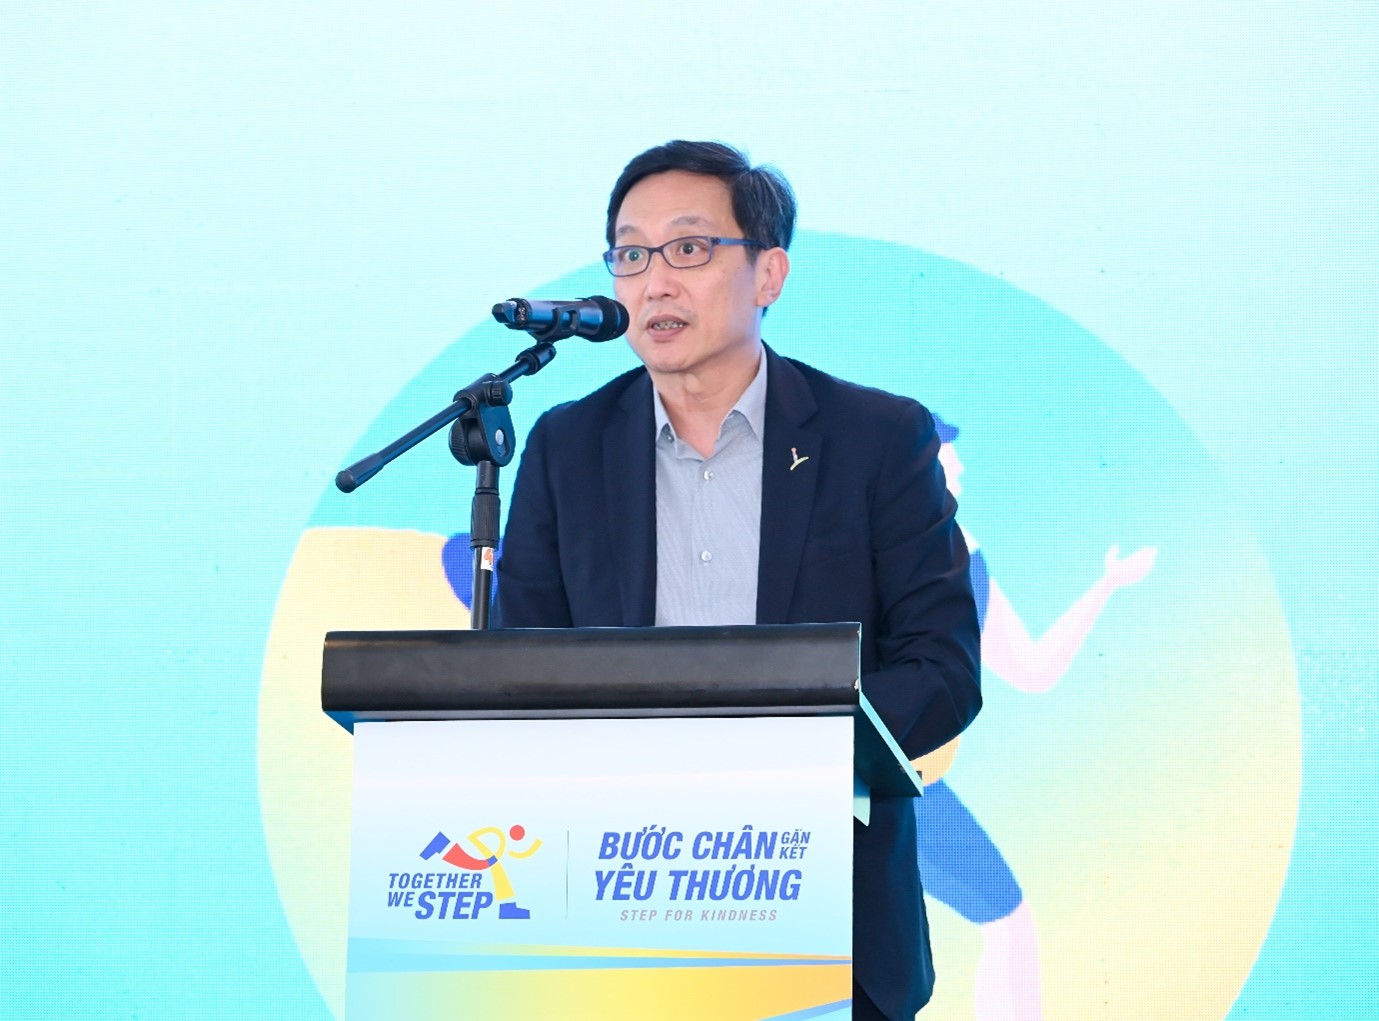 Mr Ronald Tay, CEO of CLD (Vietnam), spoke at the press conference to launch the “Steps of Love” campaign